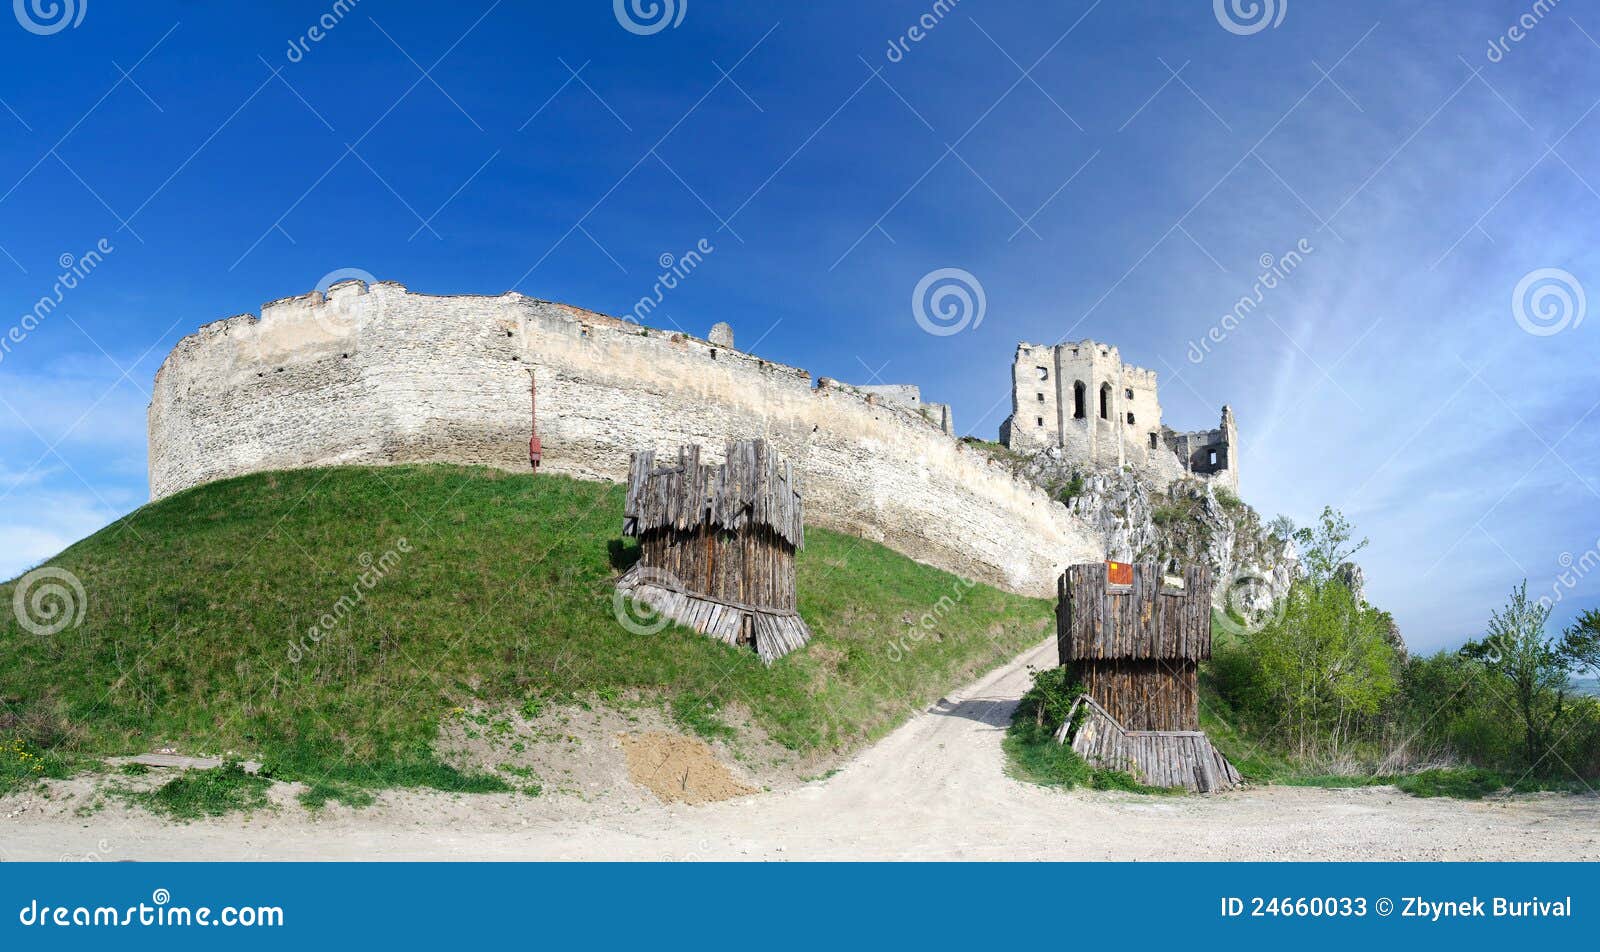 Panorama of Beckov castle. Panorama of the gothic Beckov castle ruin in Slovakia